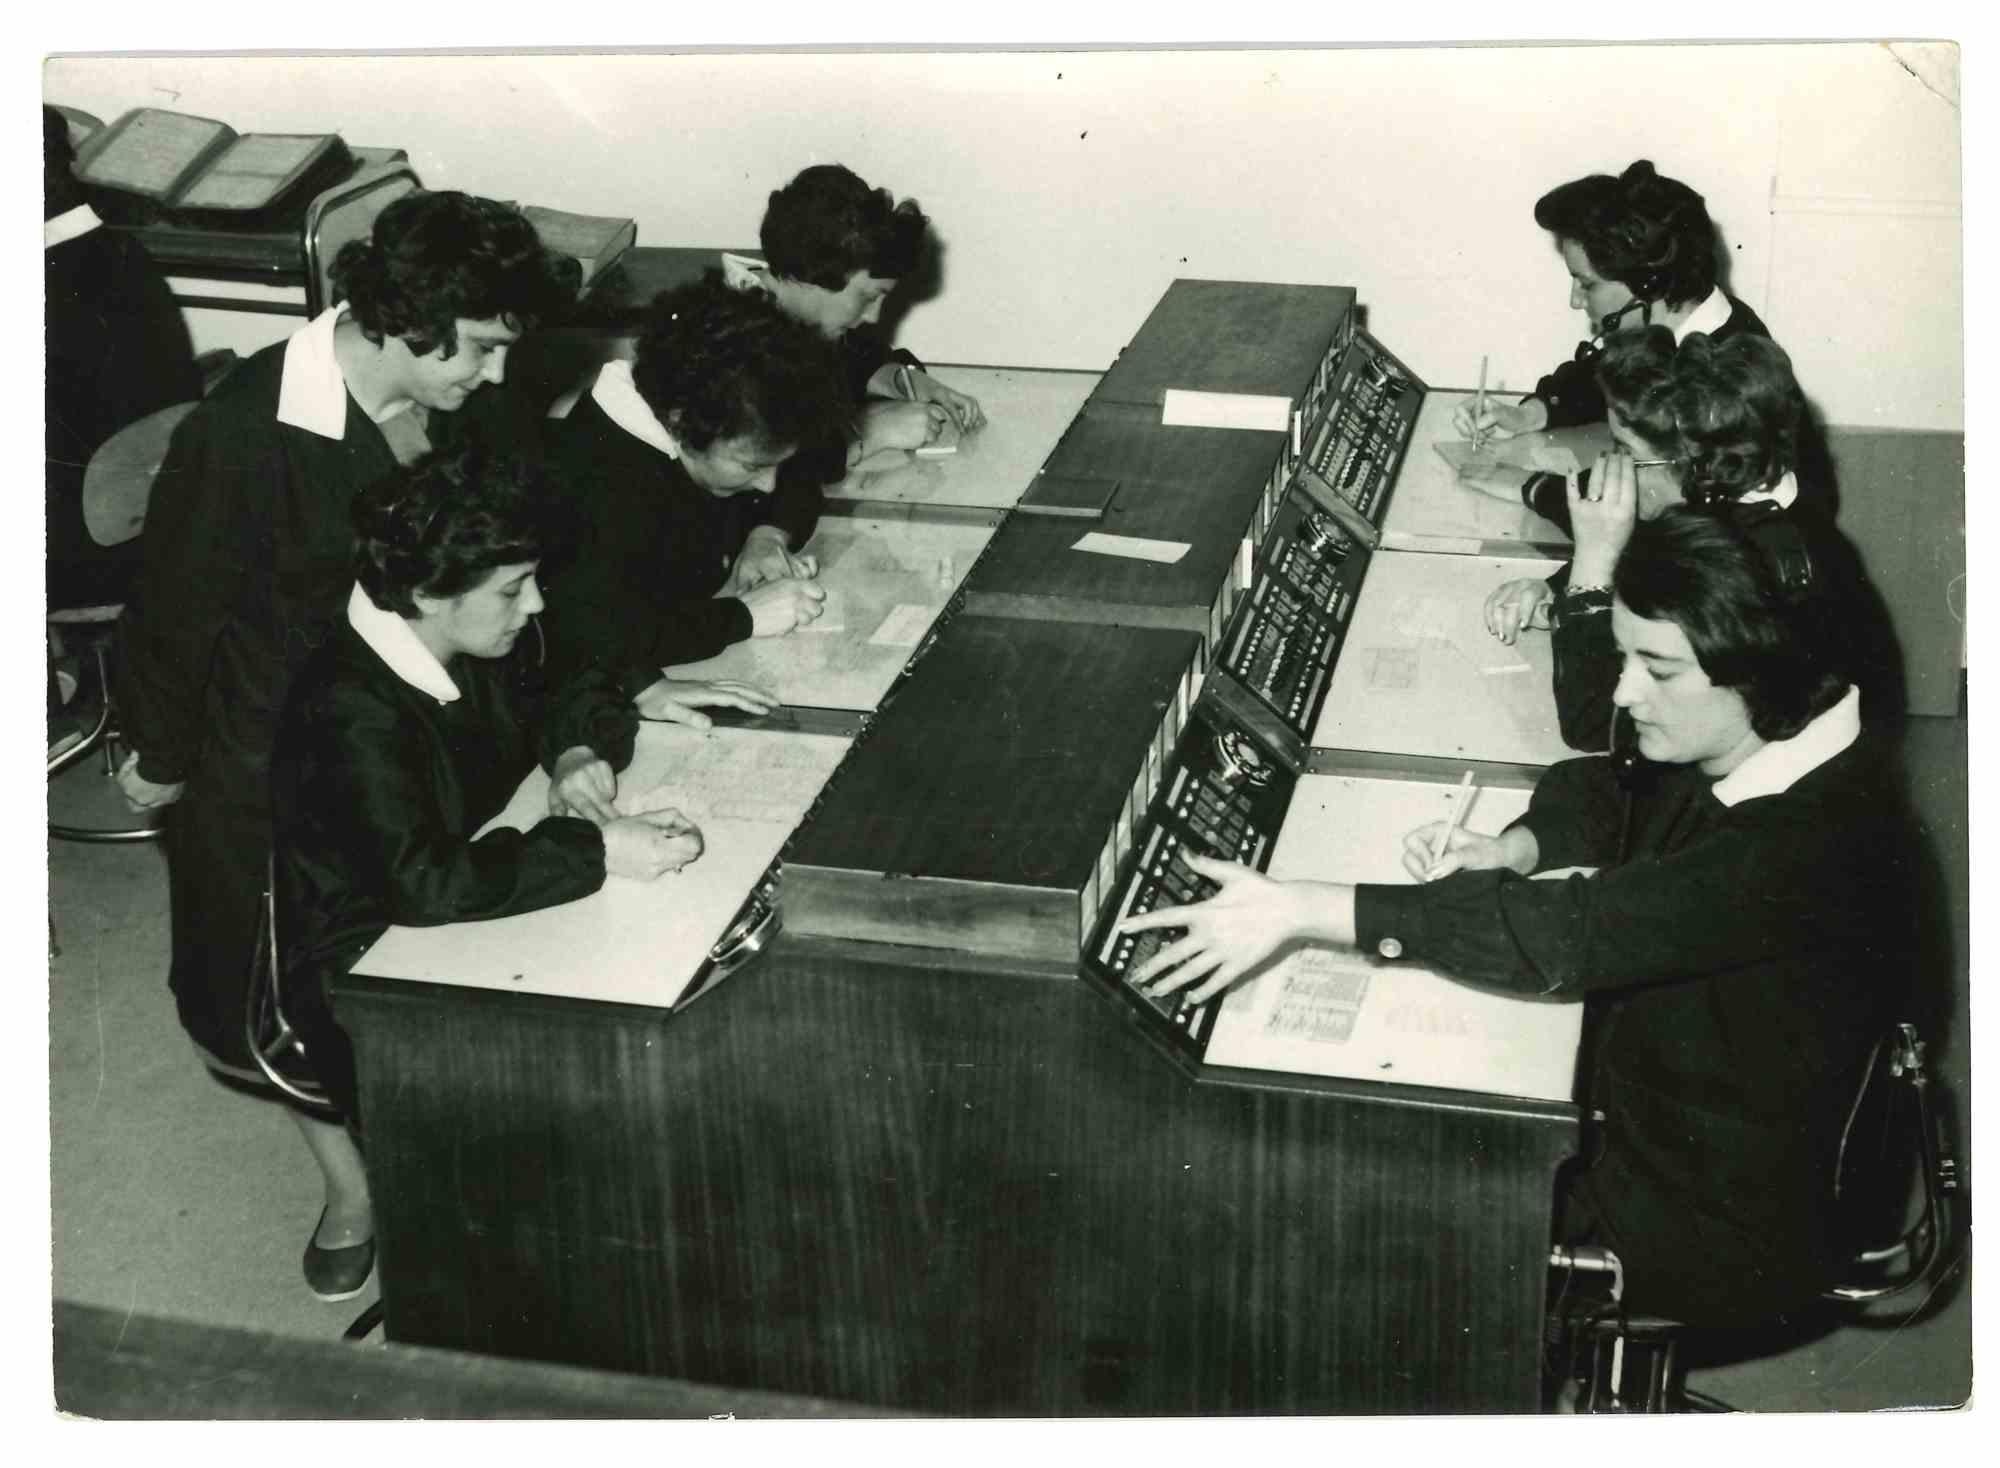 Unknown Figurative Photograph - Historical Photo- Contact Center - Vintage Photo - 1960s